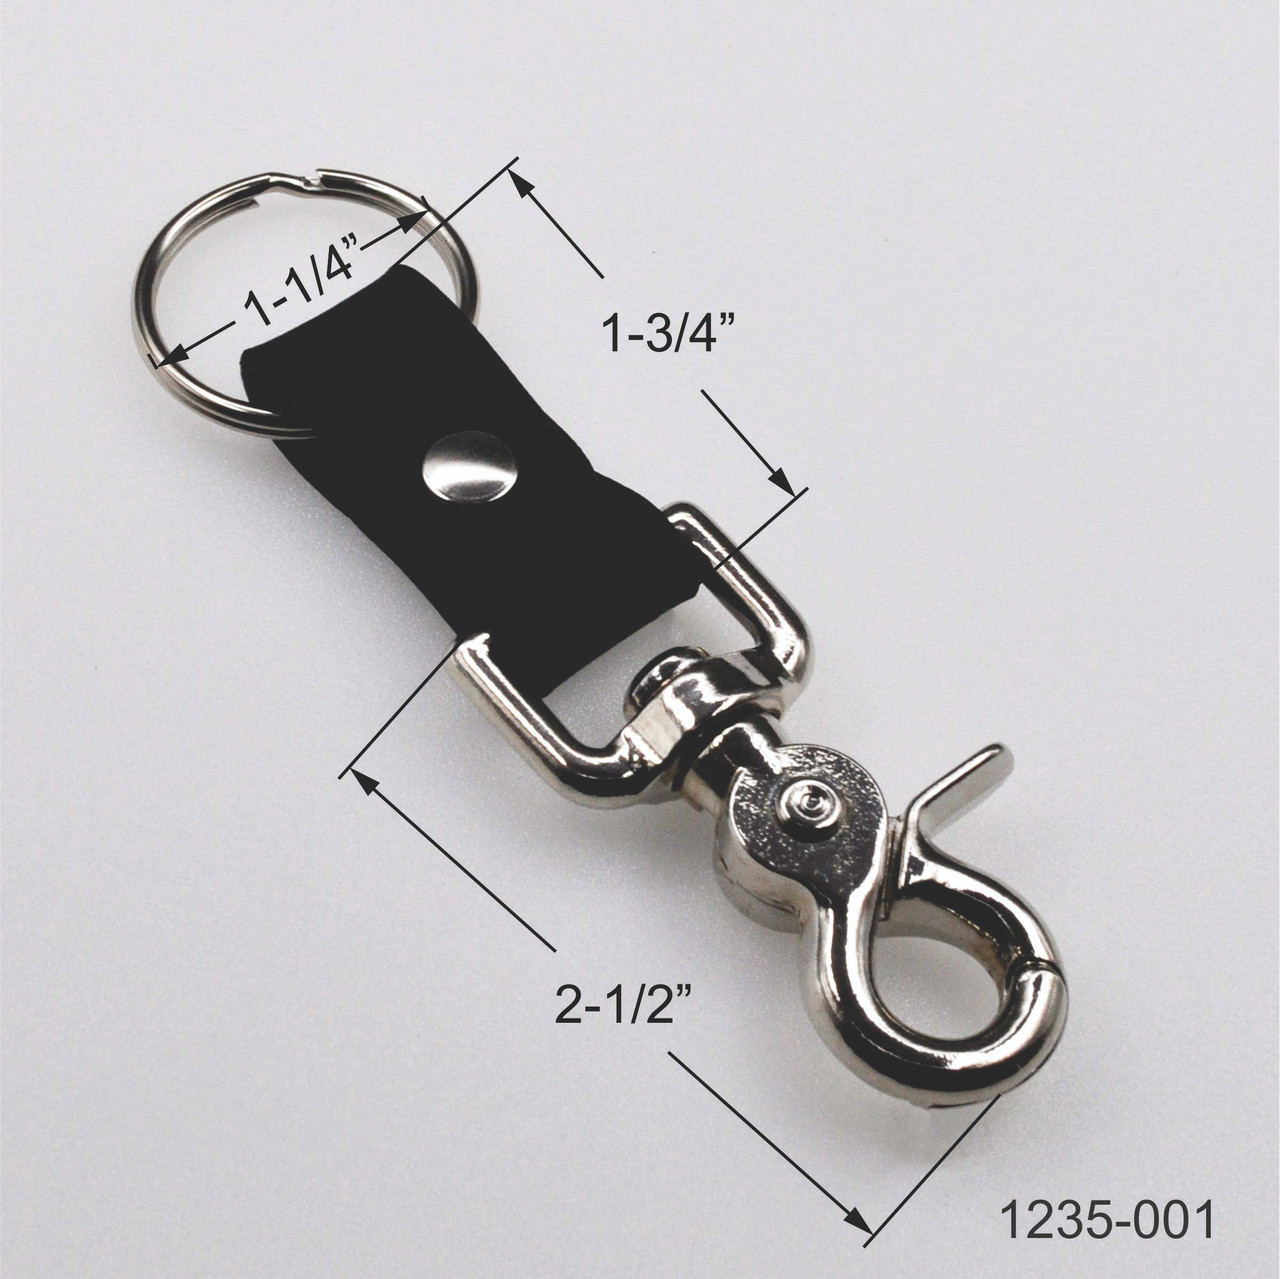 5 - 1 Inch Key Fob Hardware w/ Key Rings - Nickel Plated for